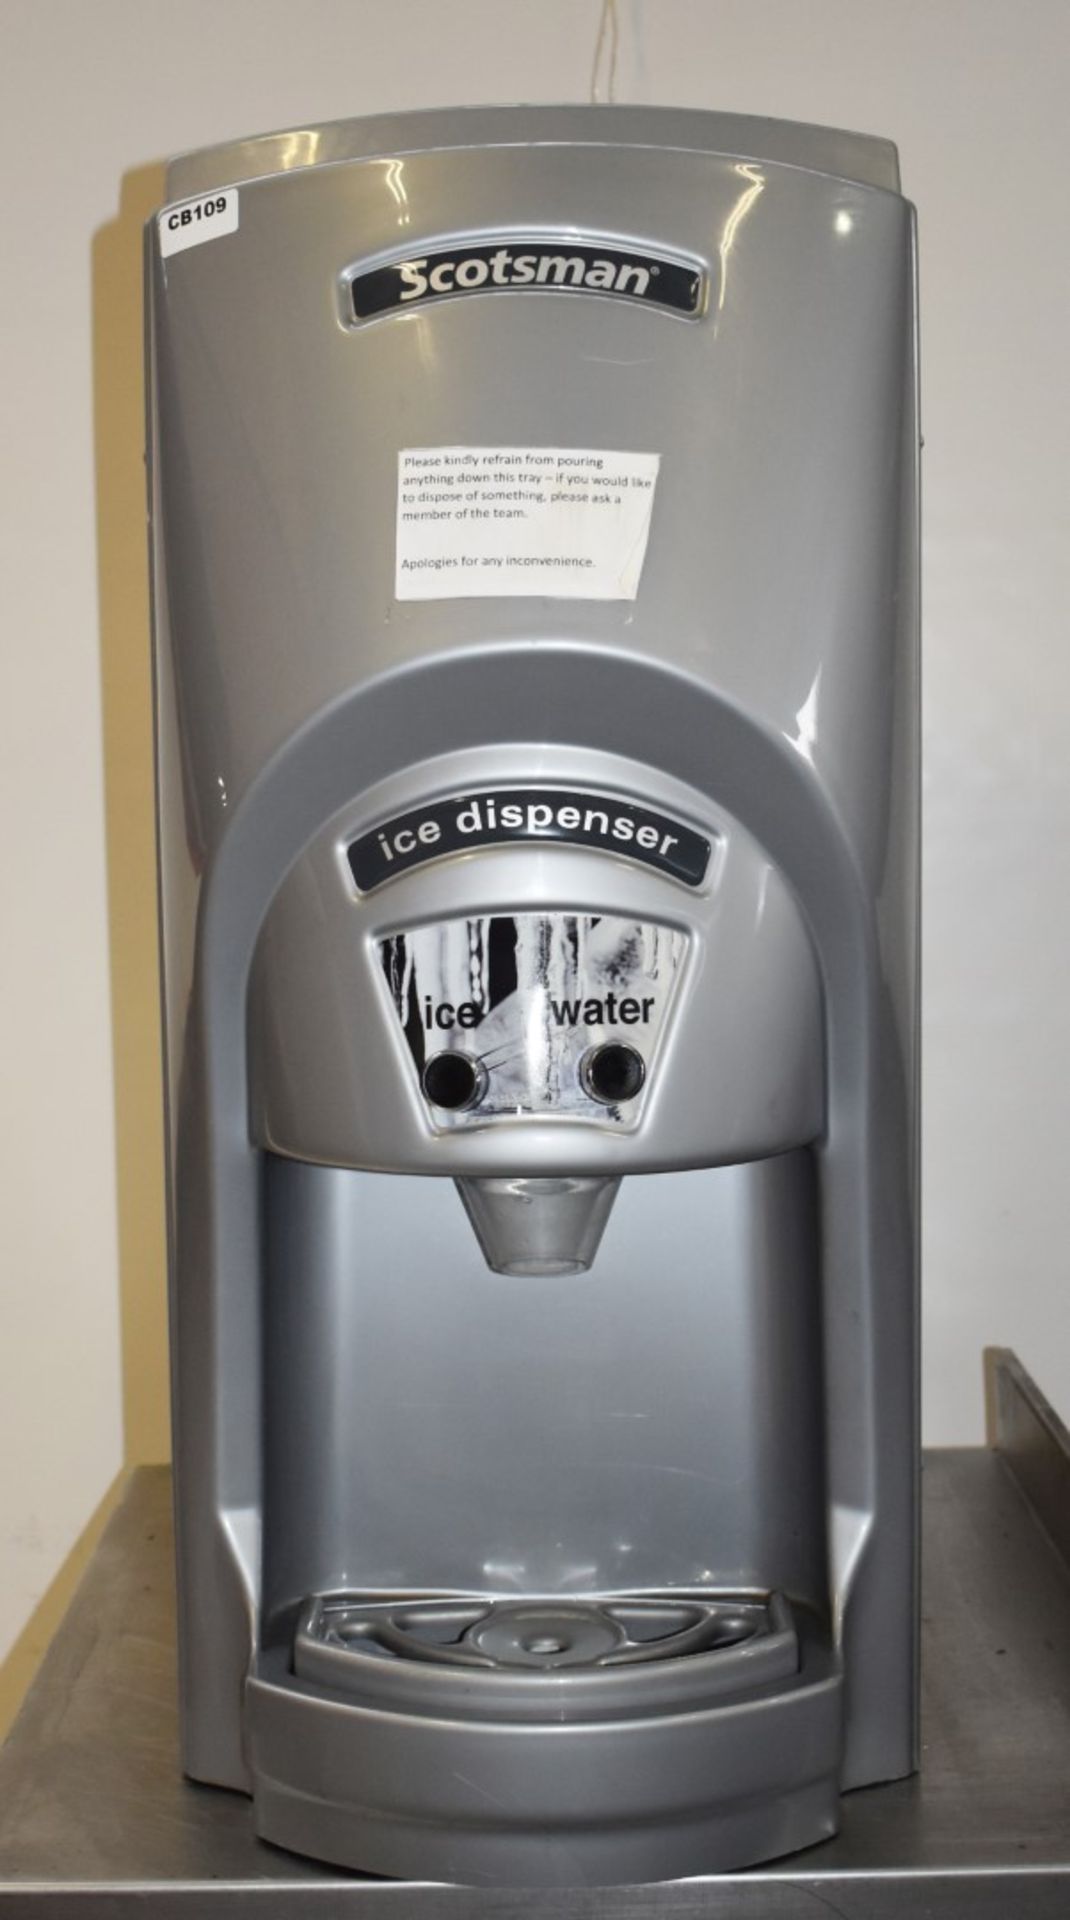 1 x Scotsman Countertop Water and Ice Dispenser - 230v - Model  TCL180-9 - Ref CB109 - CL232 - H86 x - Image 8 of 8